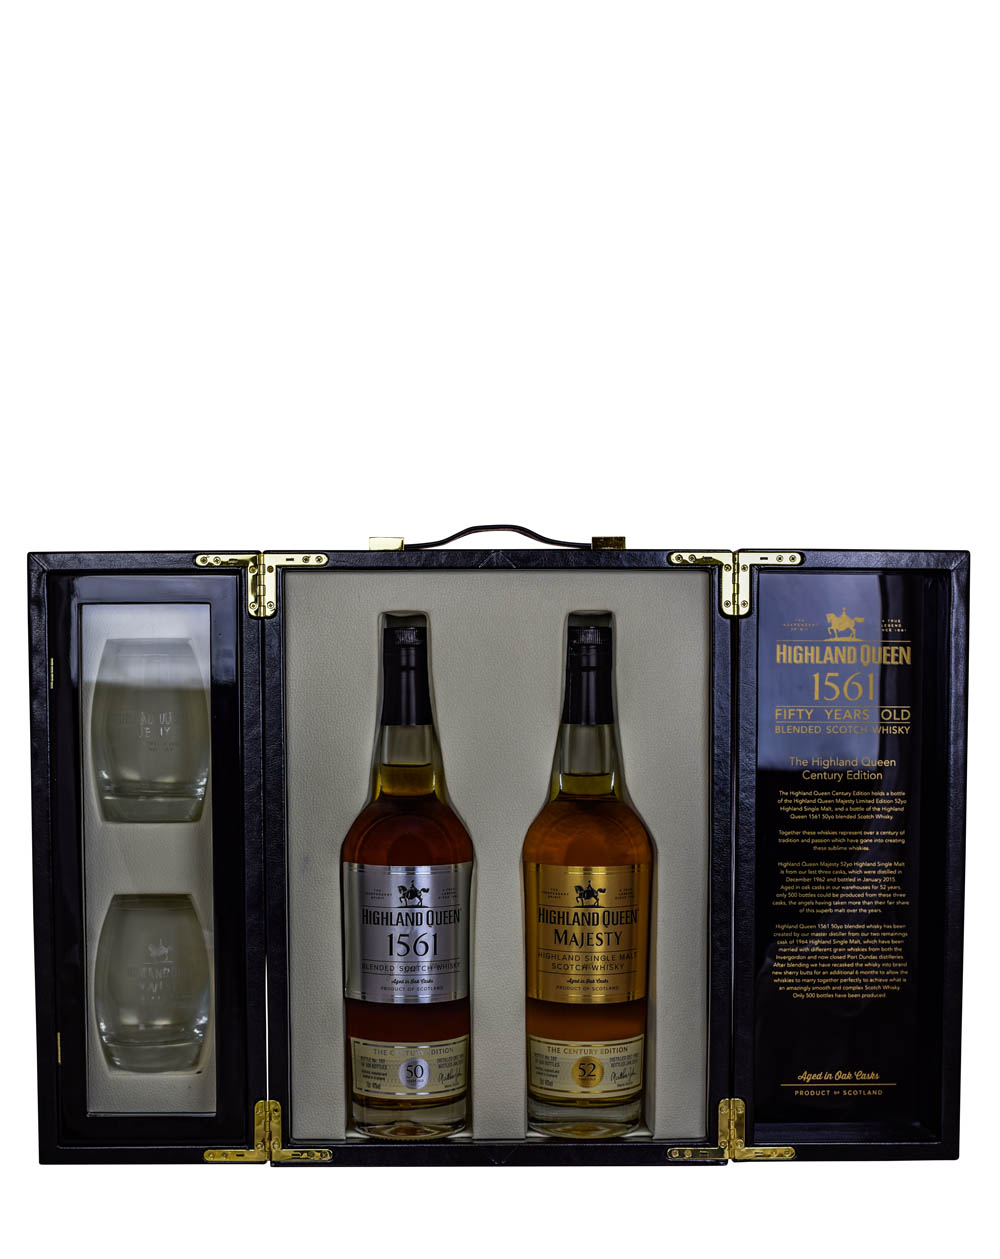 Highland Queen 50 51 Years Old Box 1 Musthave Malts MHM